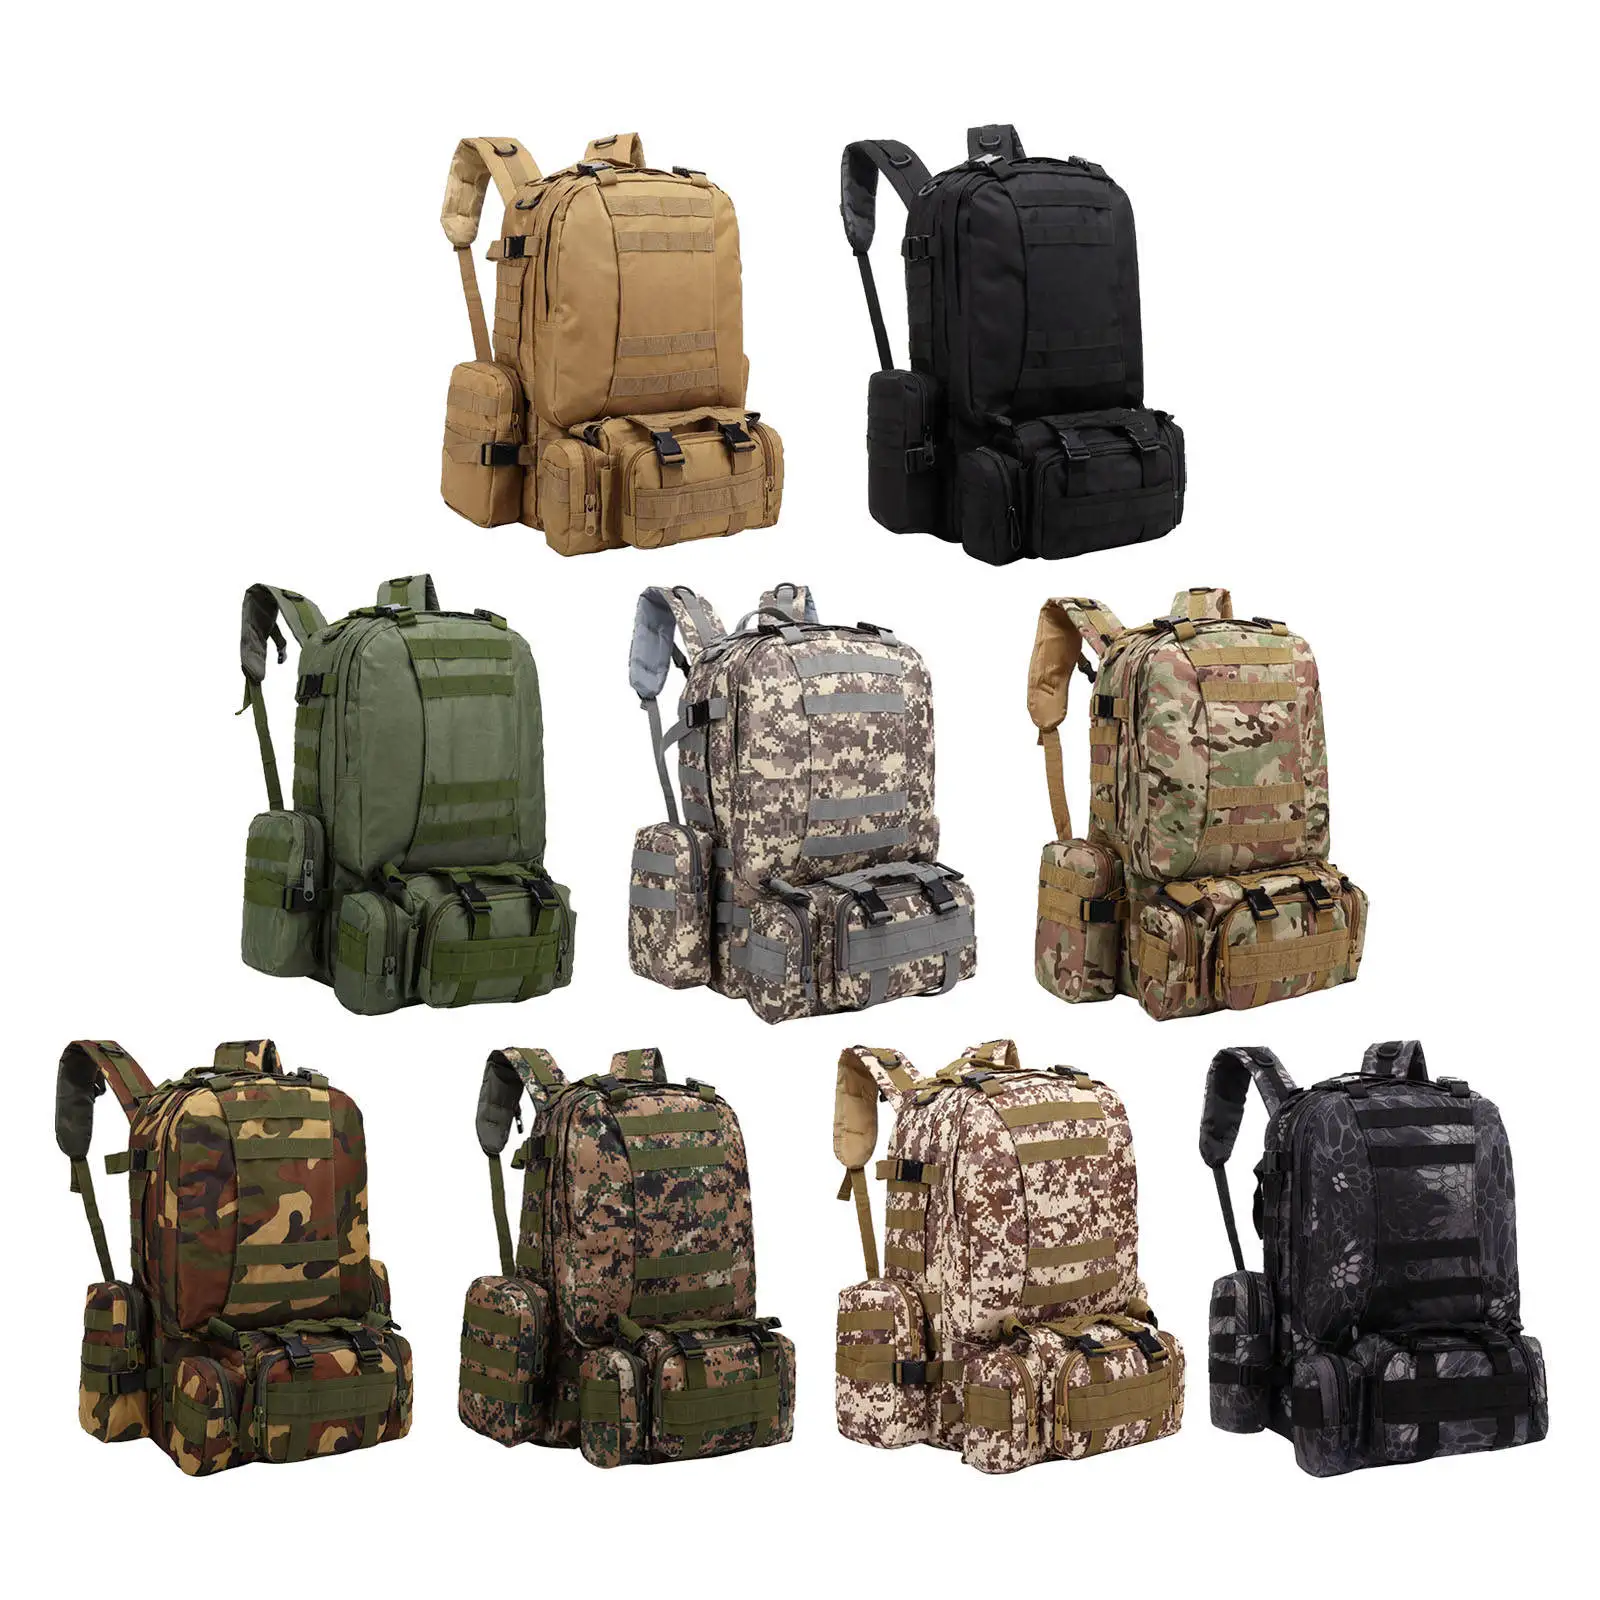 Men Tactical Backpack 55L Camouflage Outdoor Sport Hiking Camping Hunting Bags Women Travel Bag